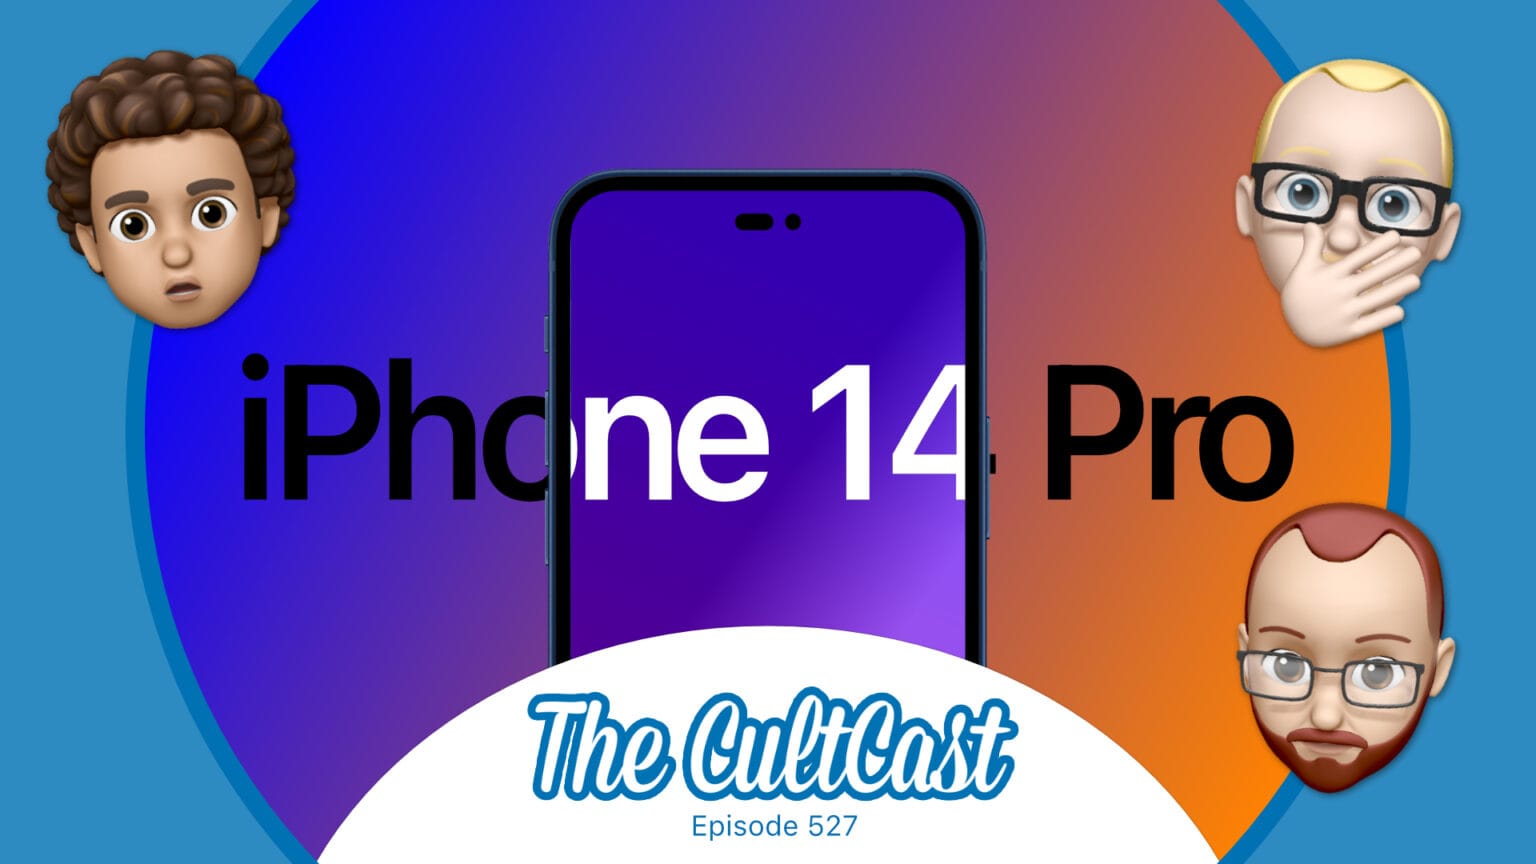 The CultCast: Will an iPhone with a 